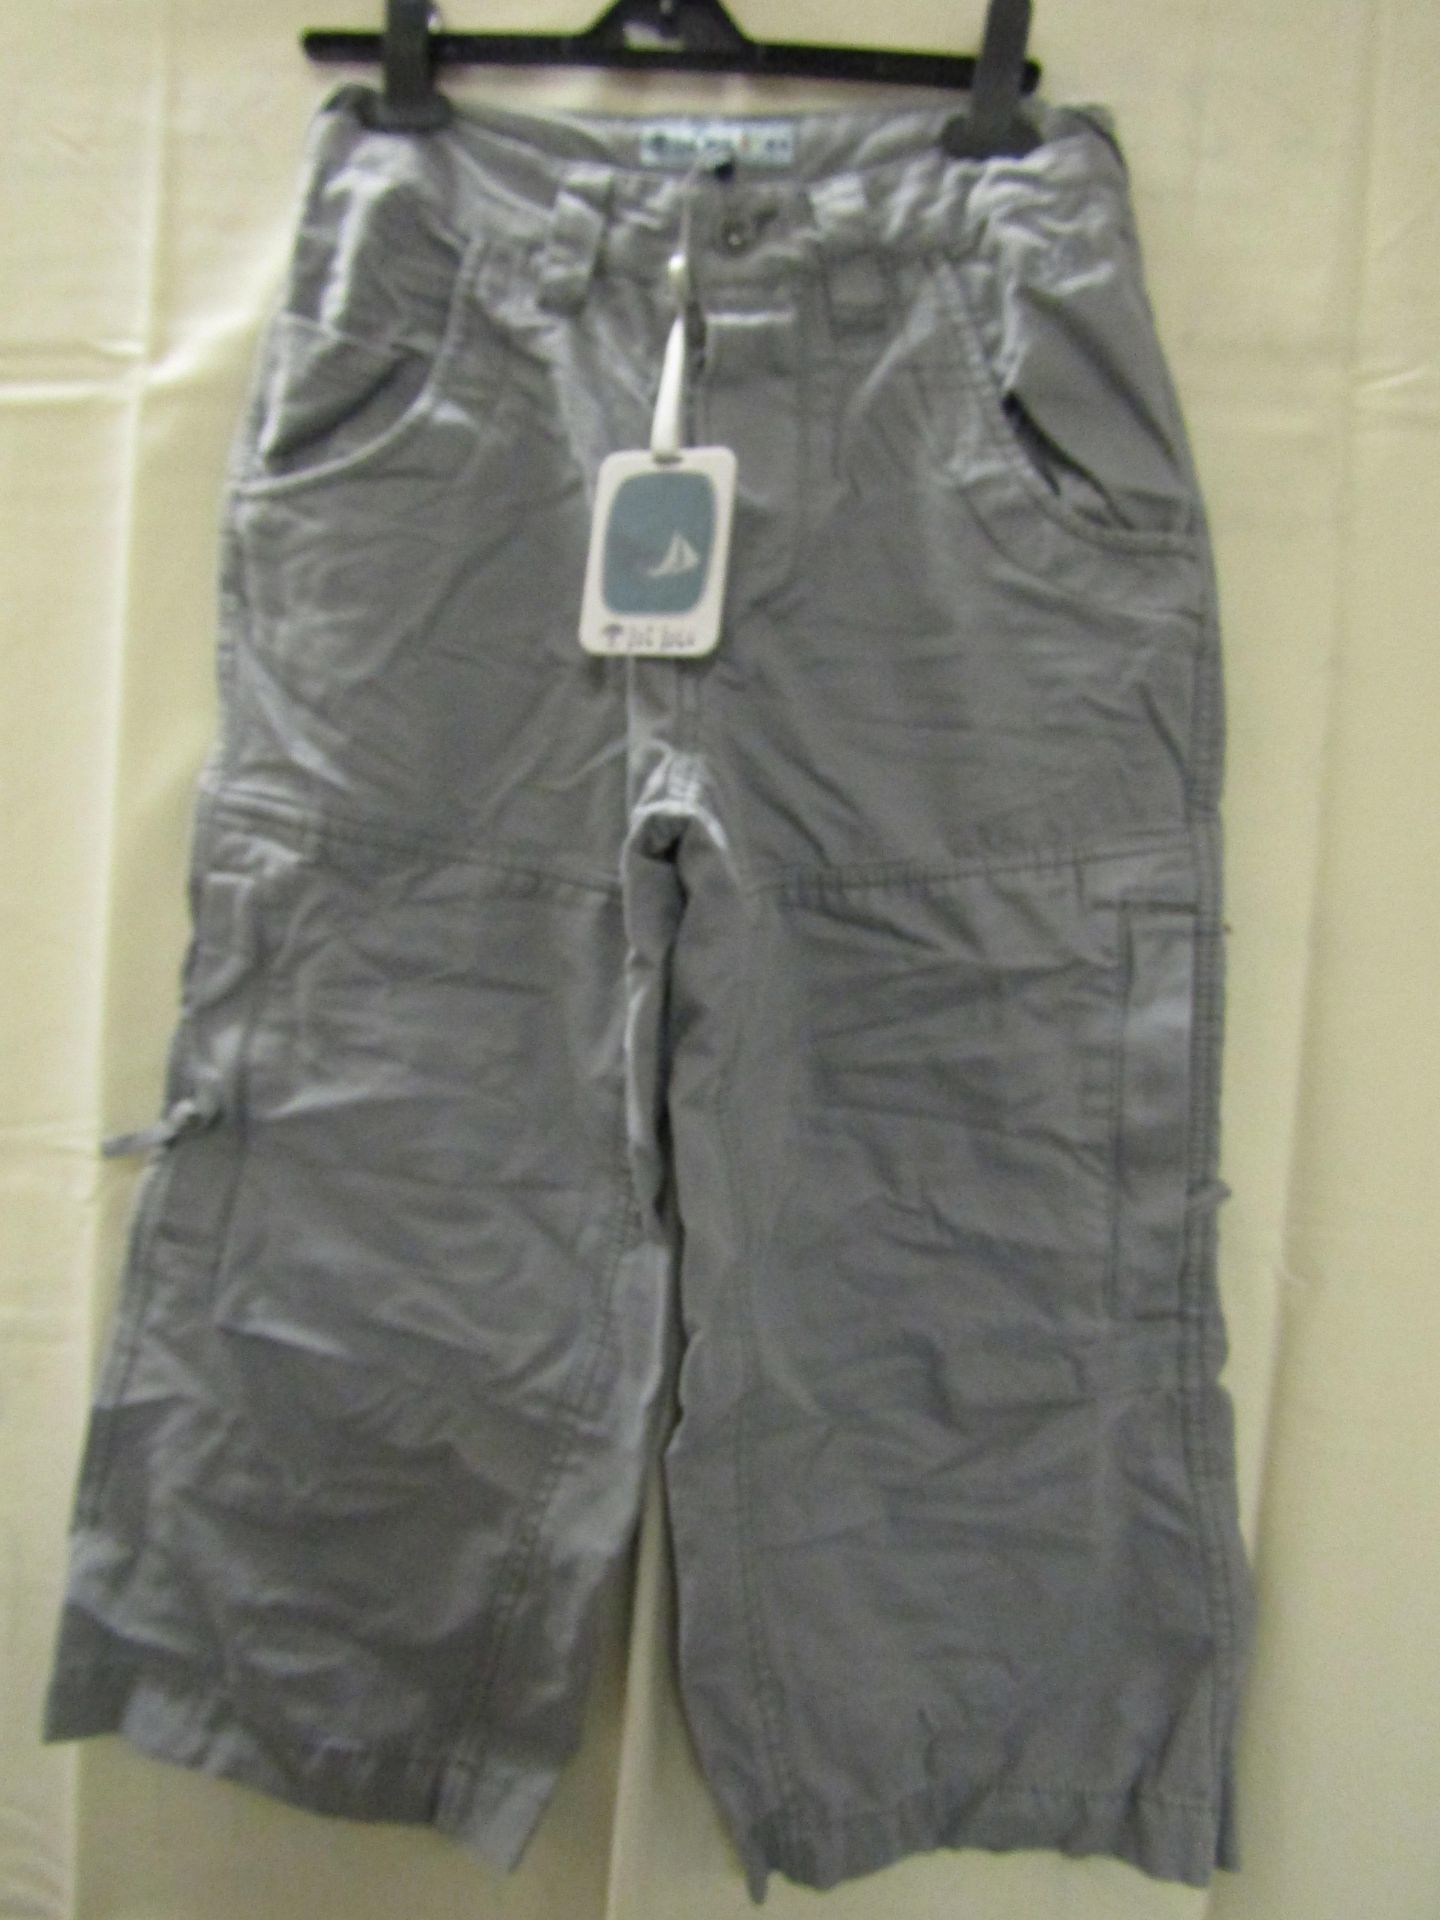 1 X Pair of Fat Face 3/4 Trouser Size 28" Waist Grey Enamel Colour New & Packaged RRP £42.50